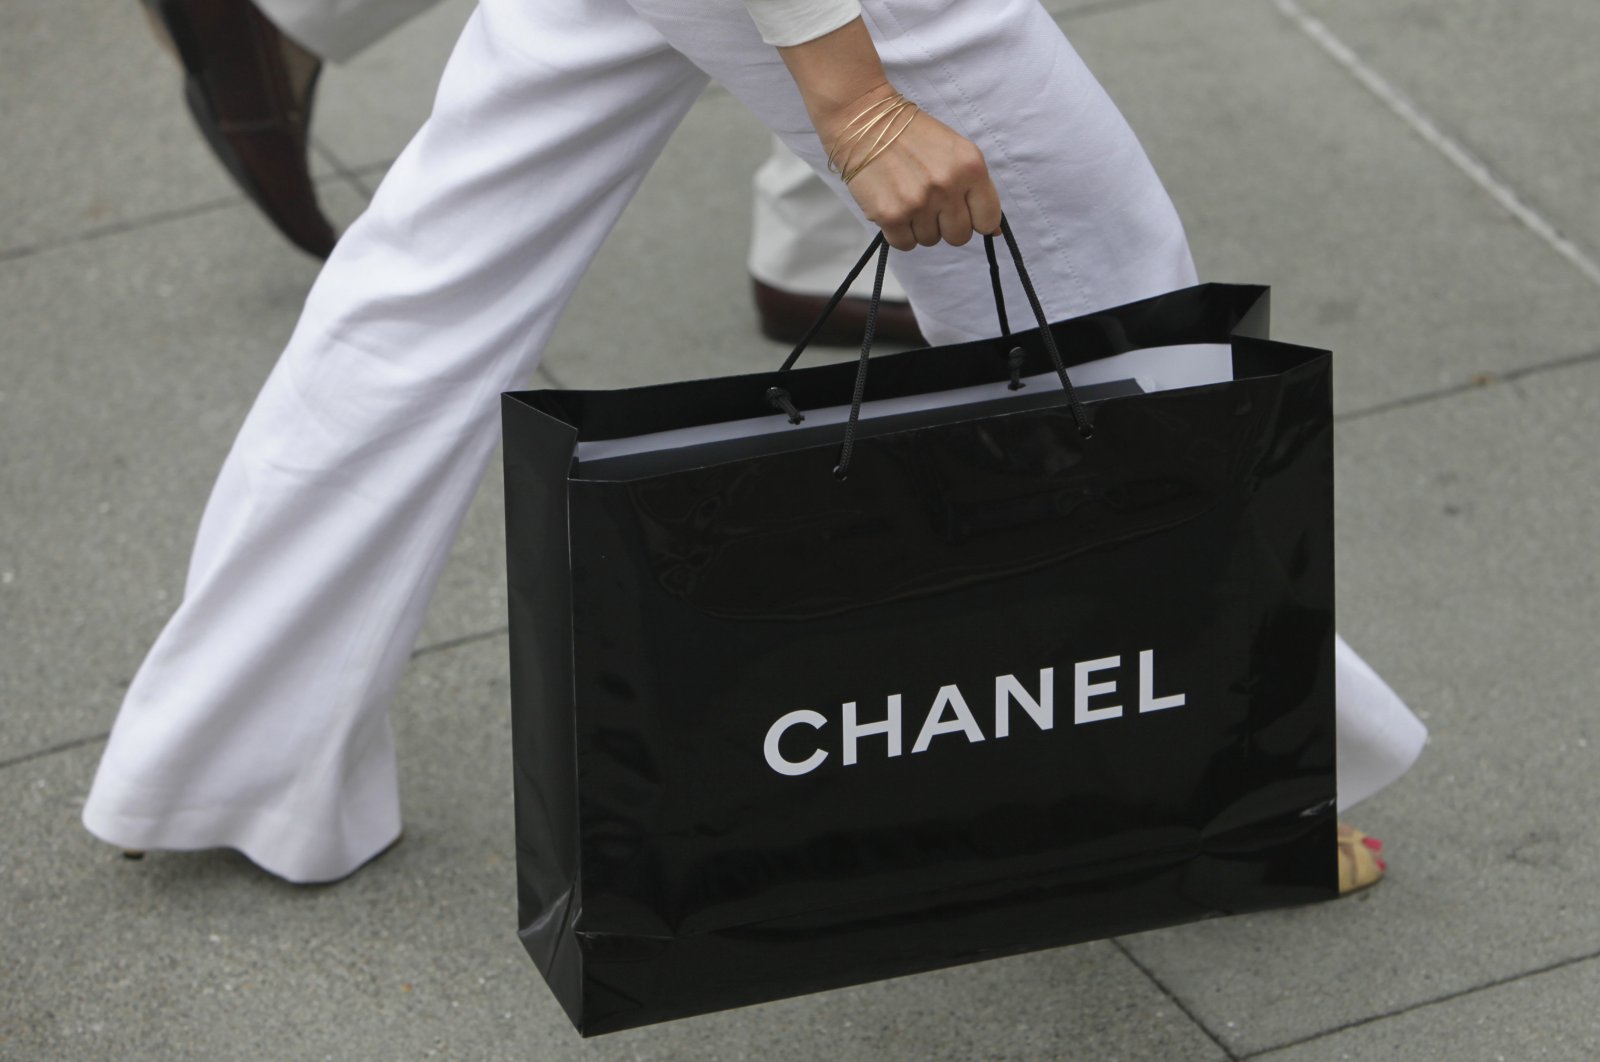 A woman carries a bag from Chanel while walking through Union Square in San Francisco, July 28, 2009. (AP Photo)